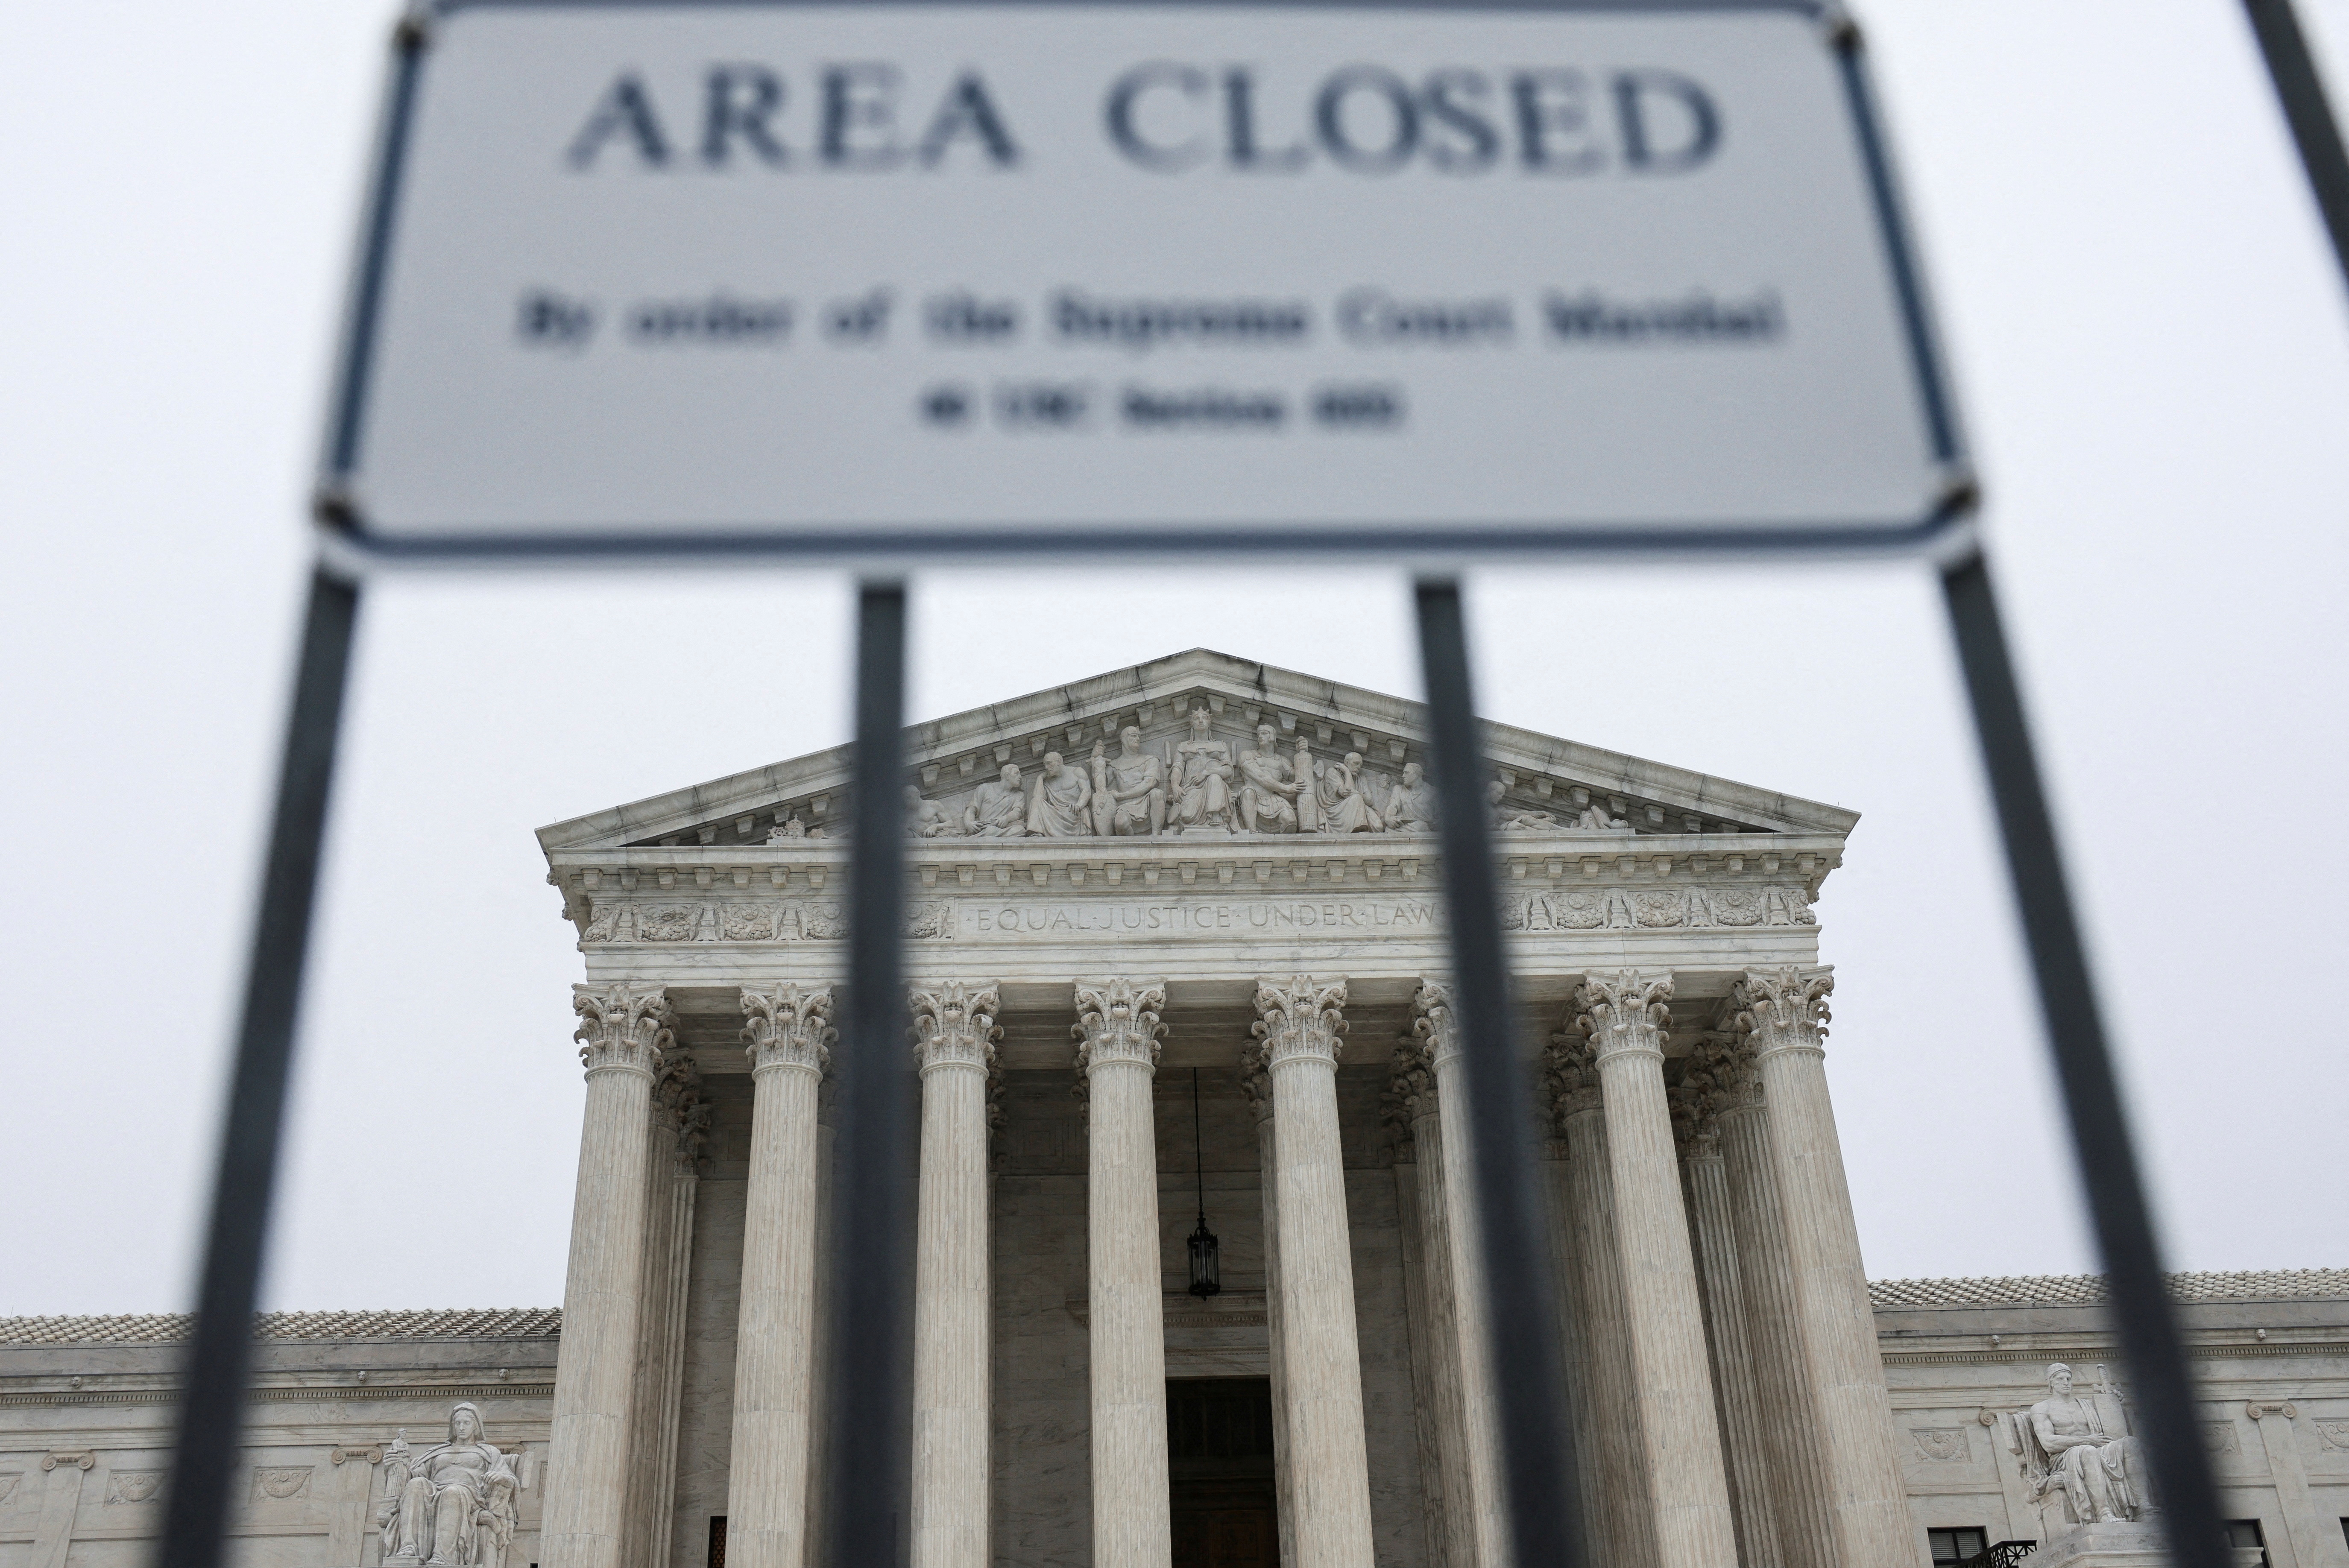 The U.S. Supreme Court is seen after leak of U.S. Supreme Court draft majority opinion on Roe v. Wade abortion-rights decision, in Washington